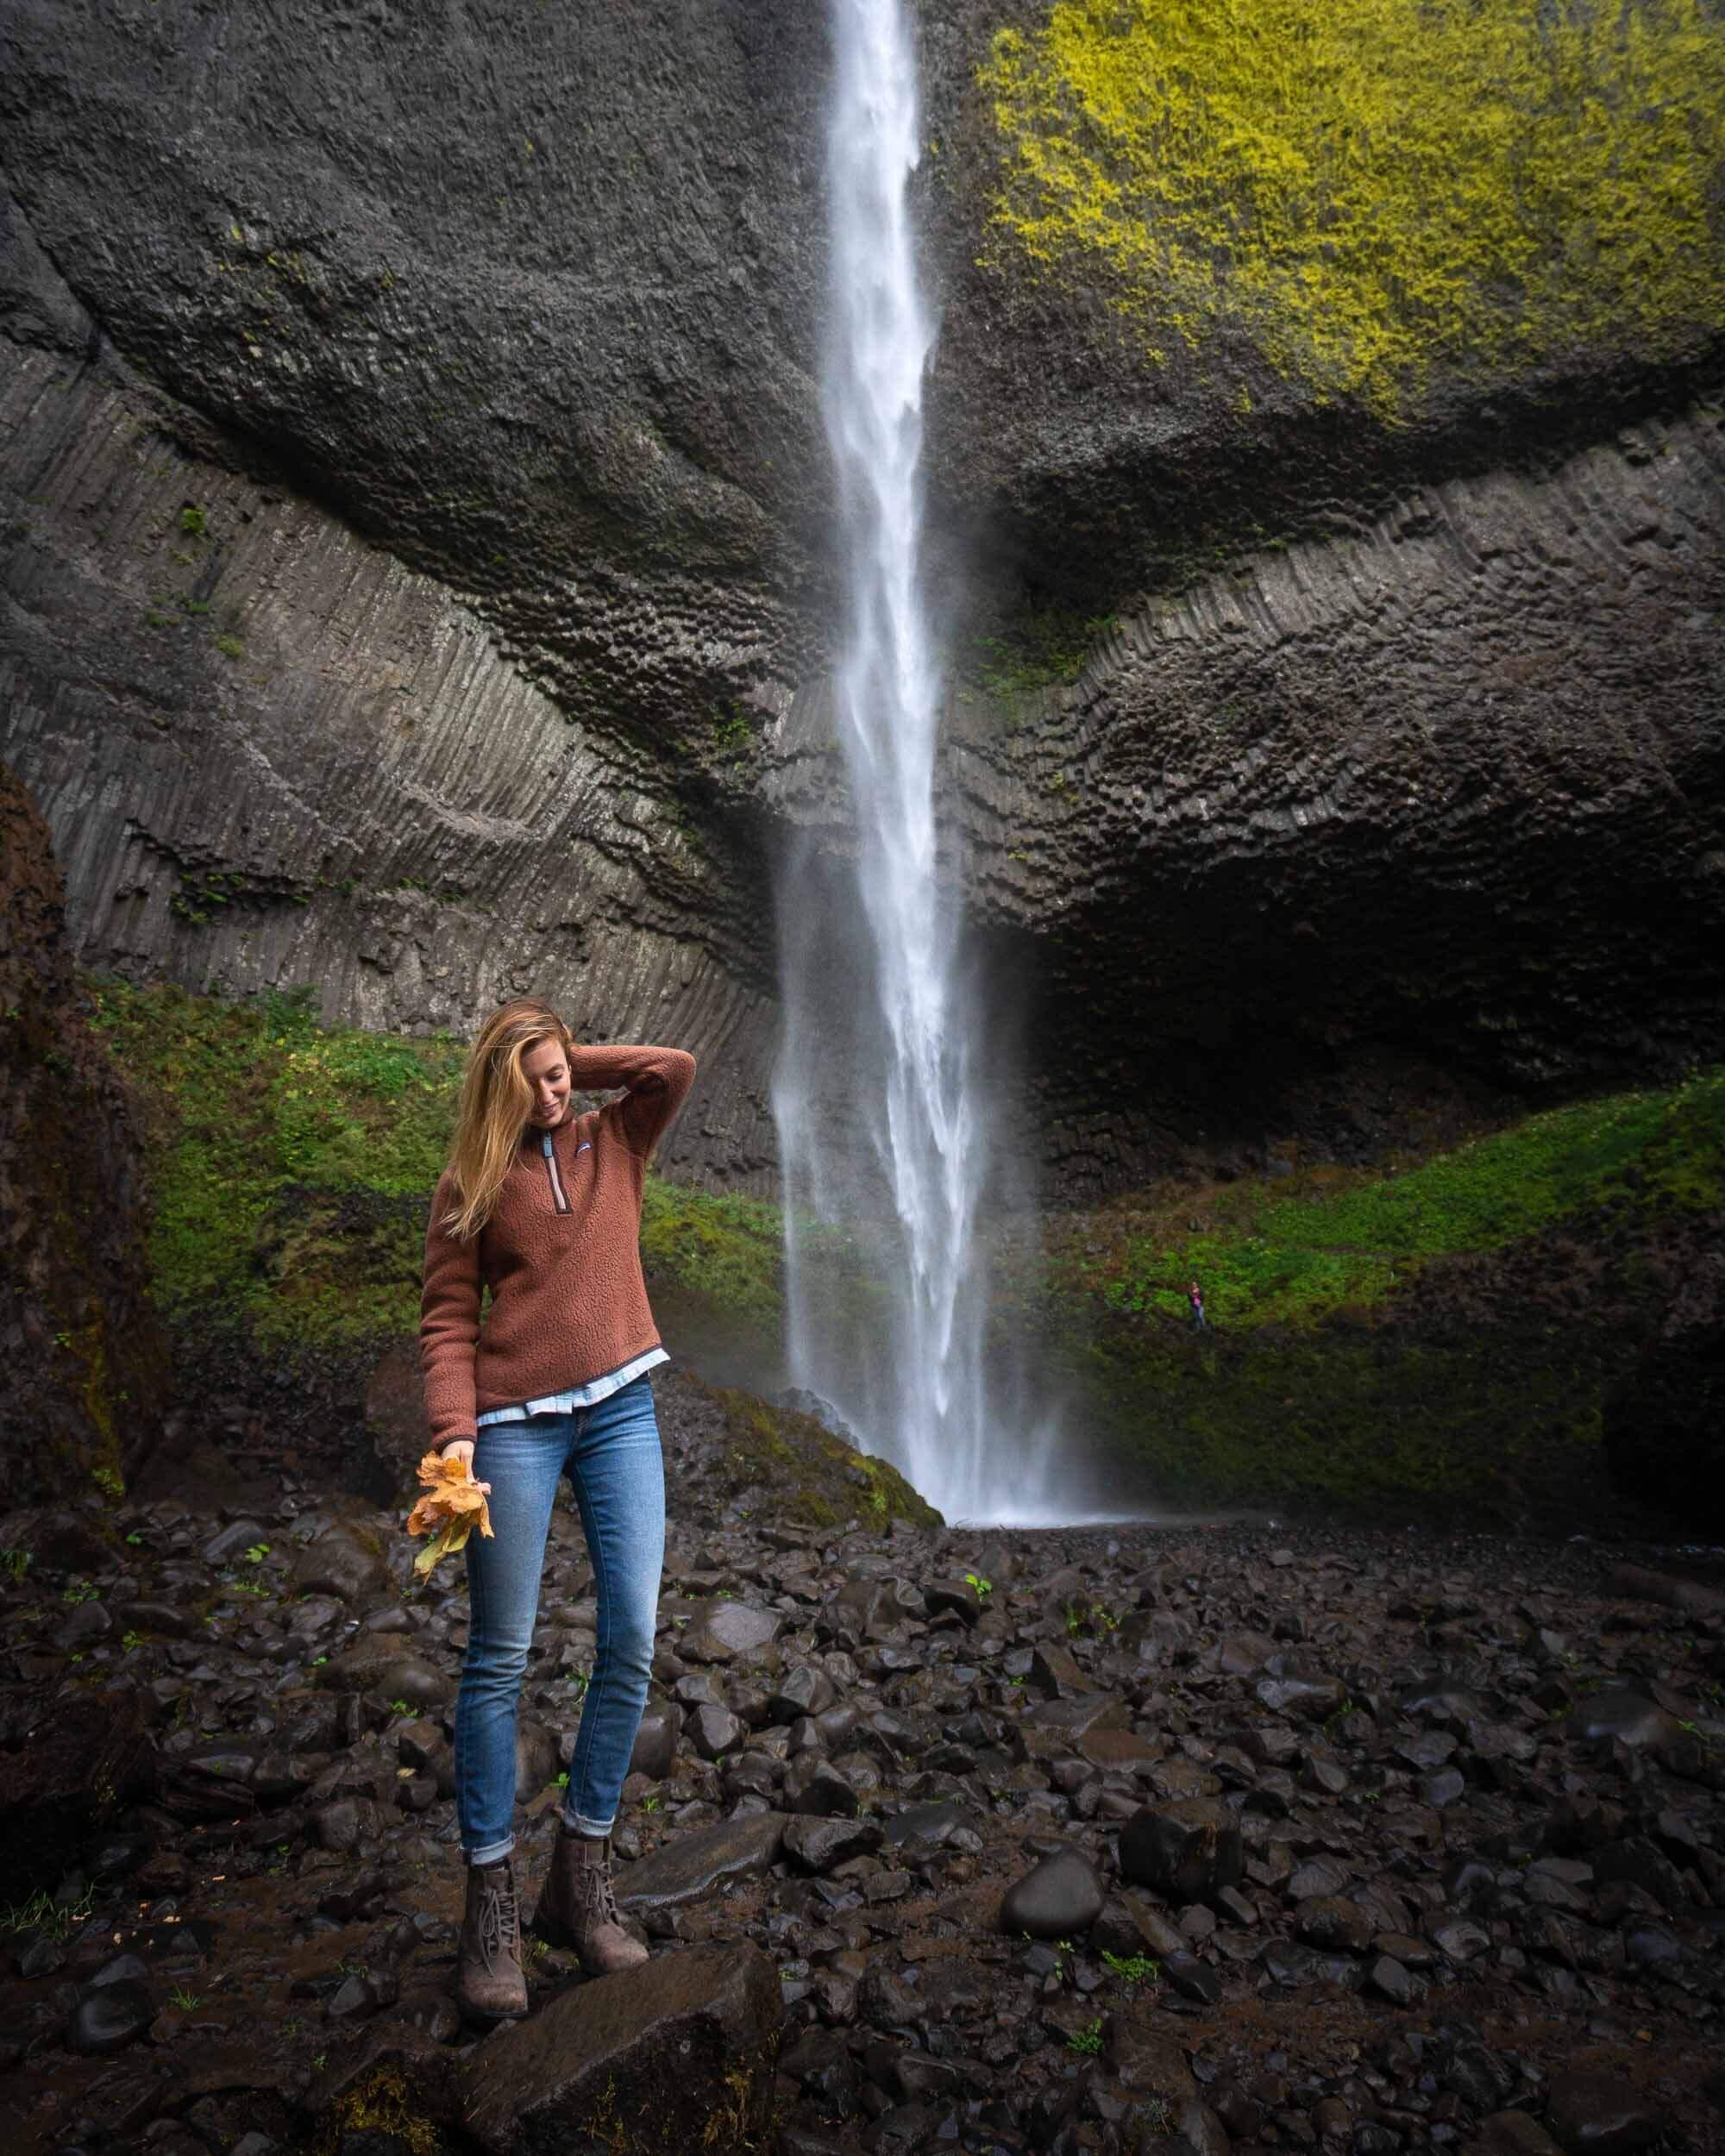 Latourell Falls is an easily accessible waterfall along the Columbia River Gorge.